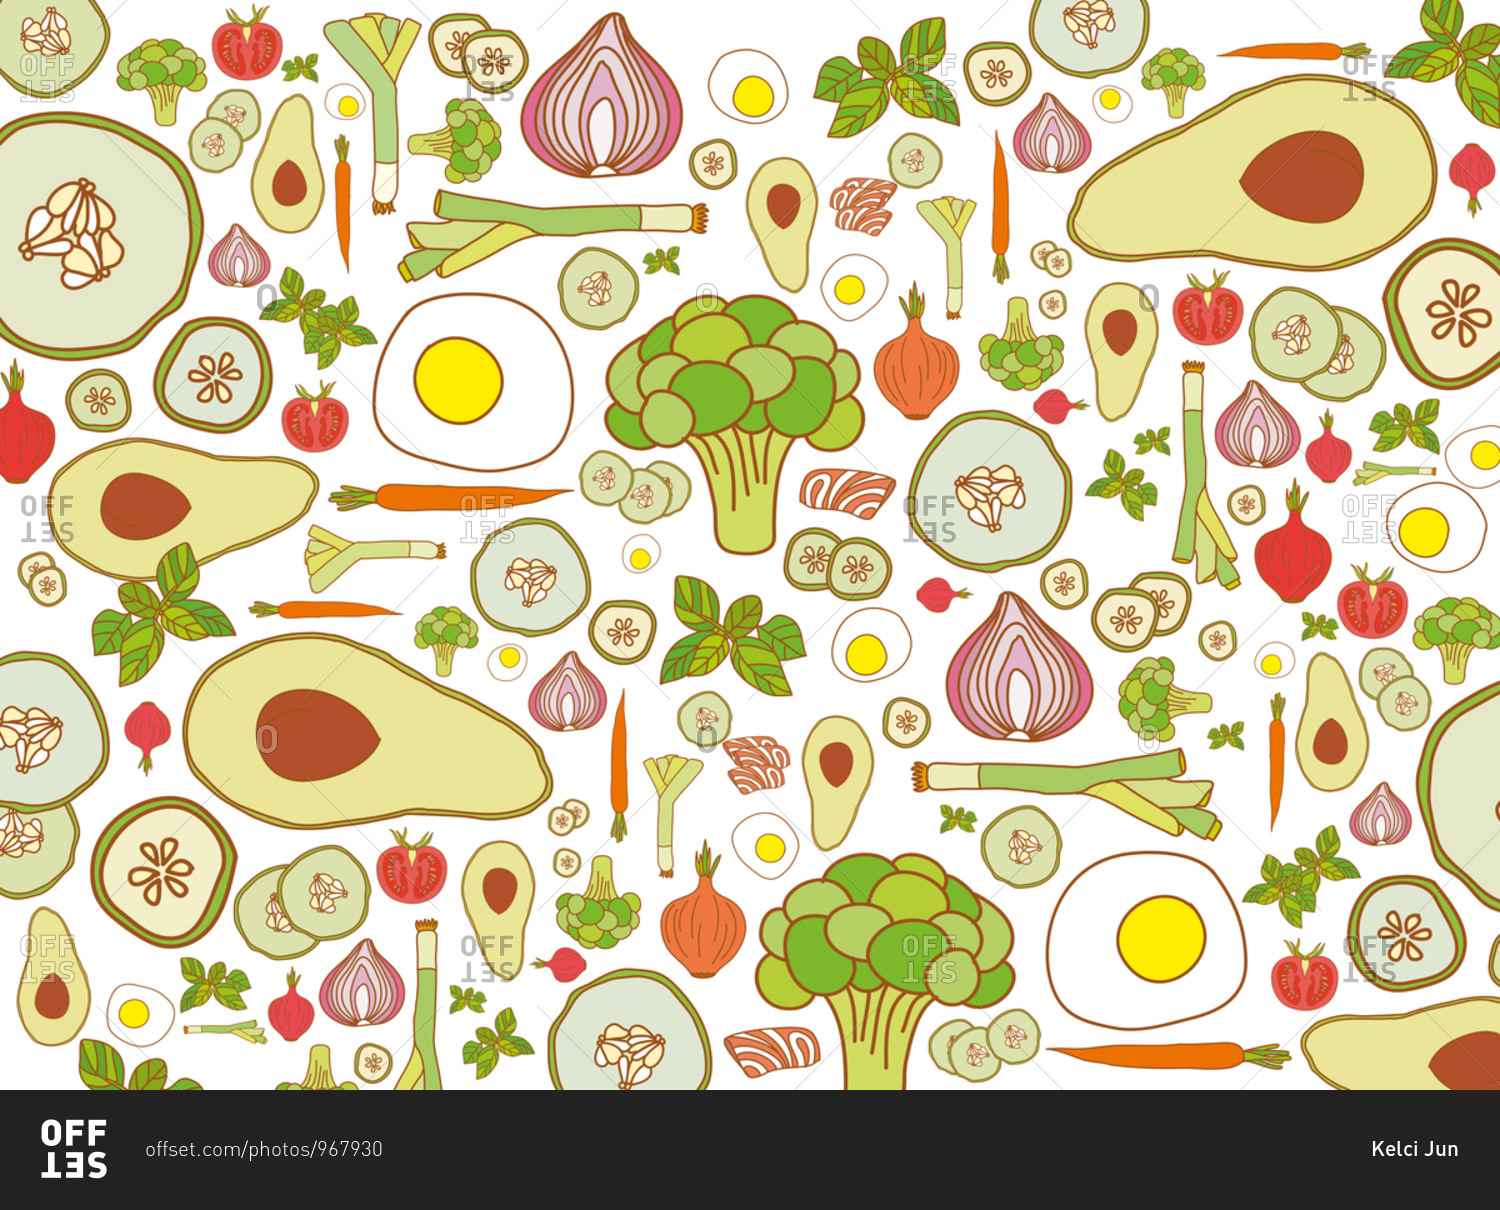 Illustration of healthy vegetables and eggs in a pattern\
stock photo - OFFSET